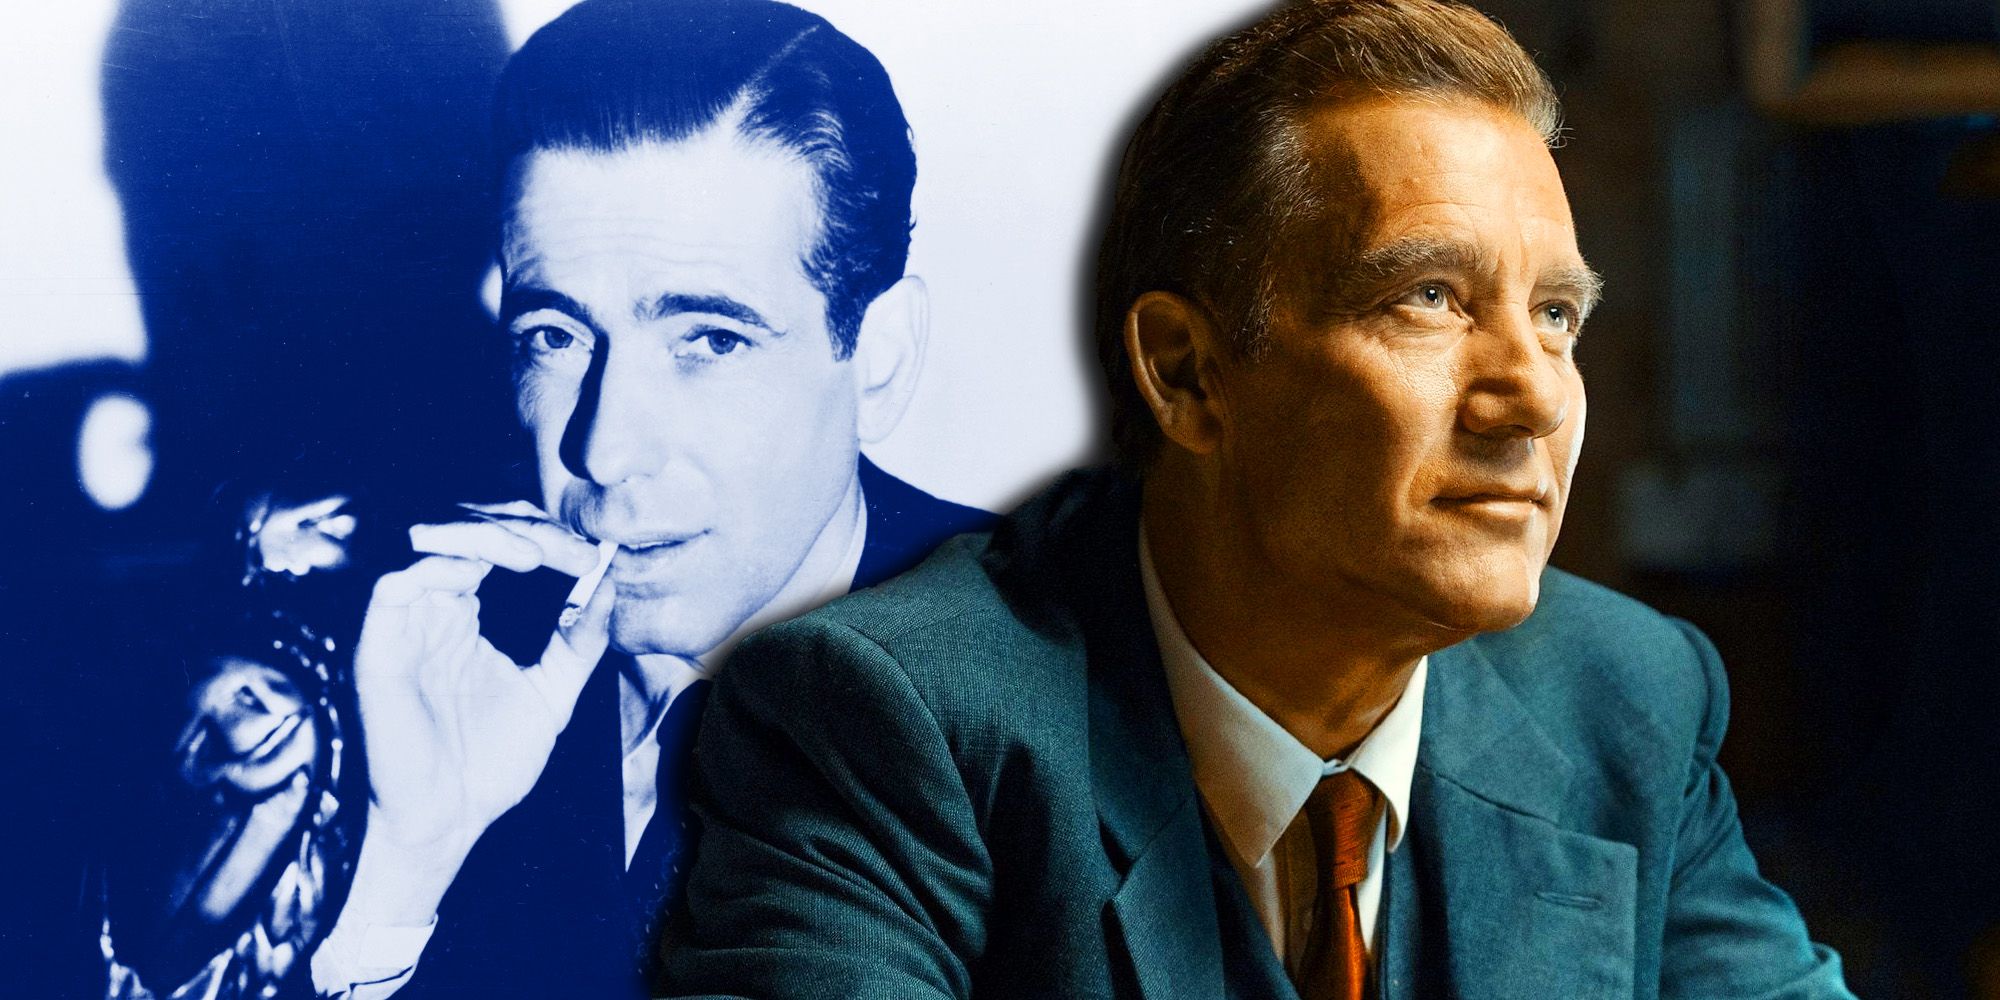 Humphrey Bogart from The Maltese Falcon with Clive Owen's Sam Spade in Monsieur Spade